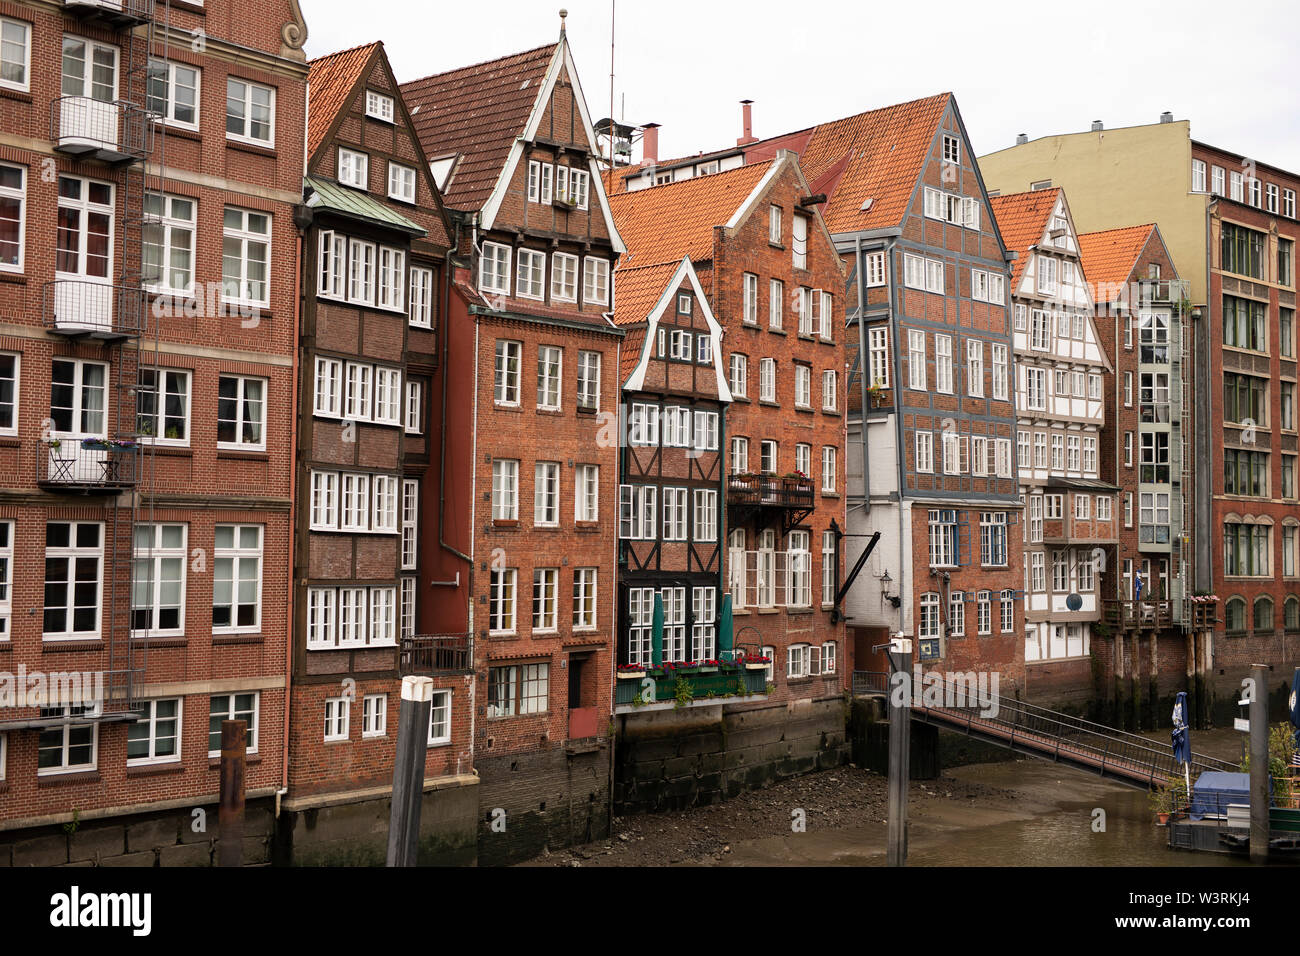 Historic buildings on Deichstrasse on the Nikolaifleet in Hamburg, Germany. Deichstrasse is the oldest remaining street in the Altstadt. Stock Photo